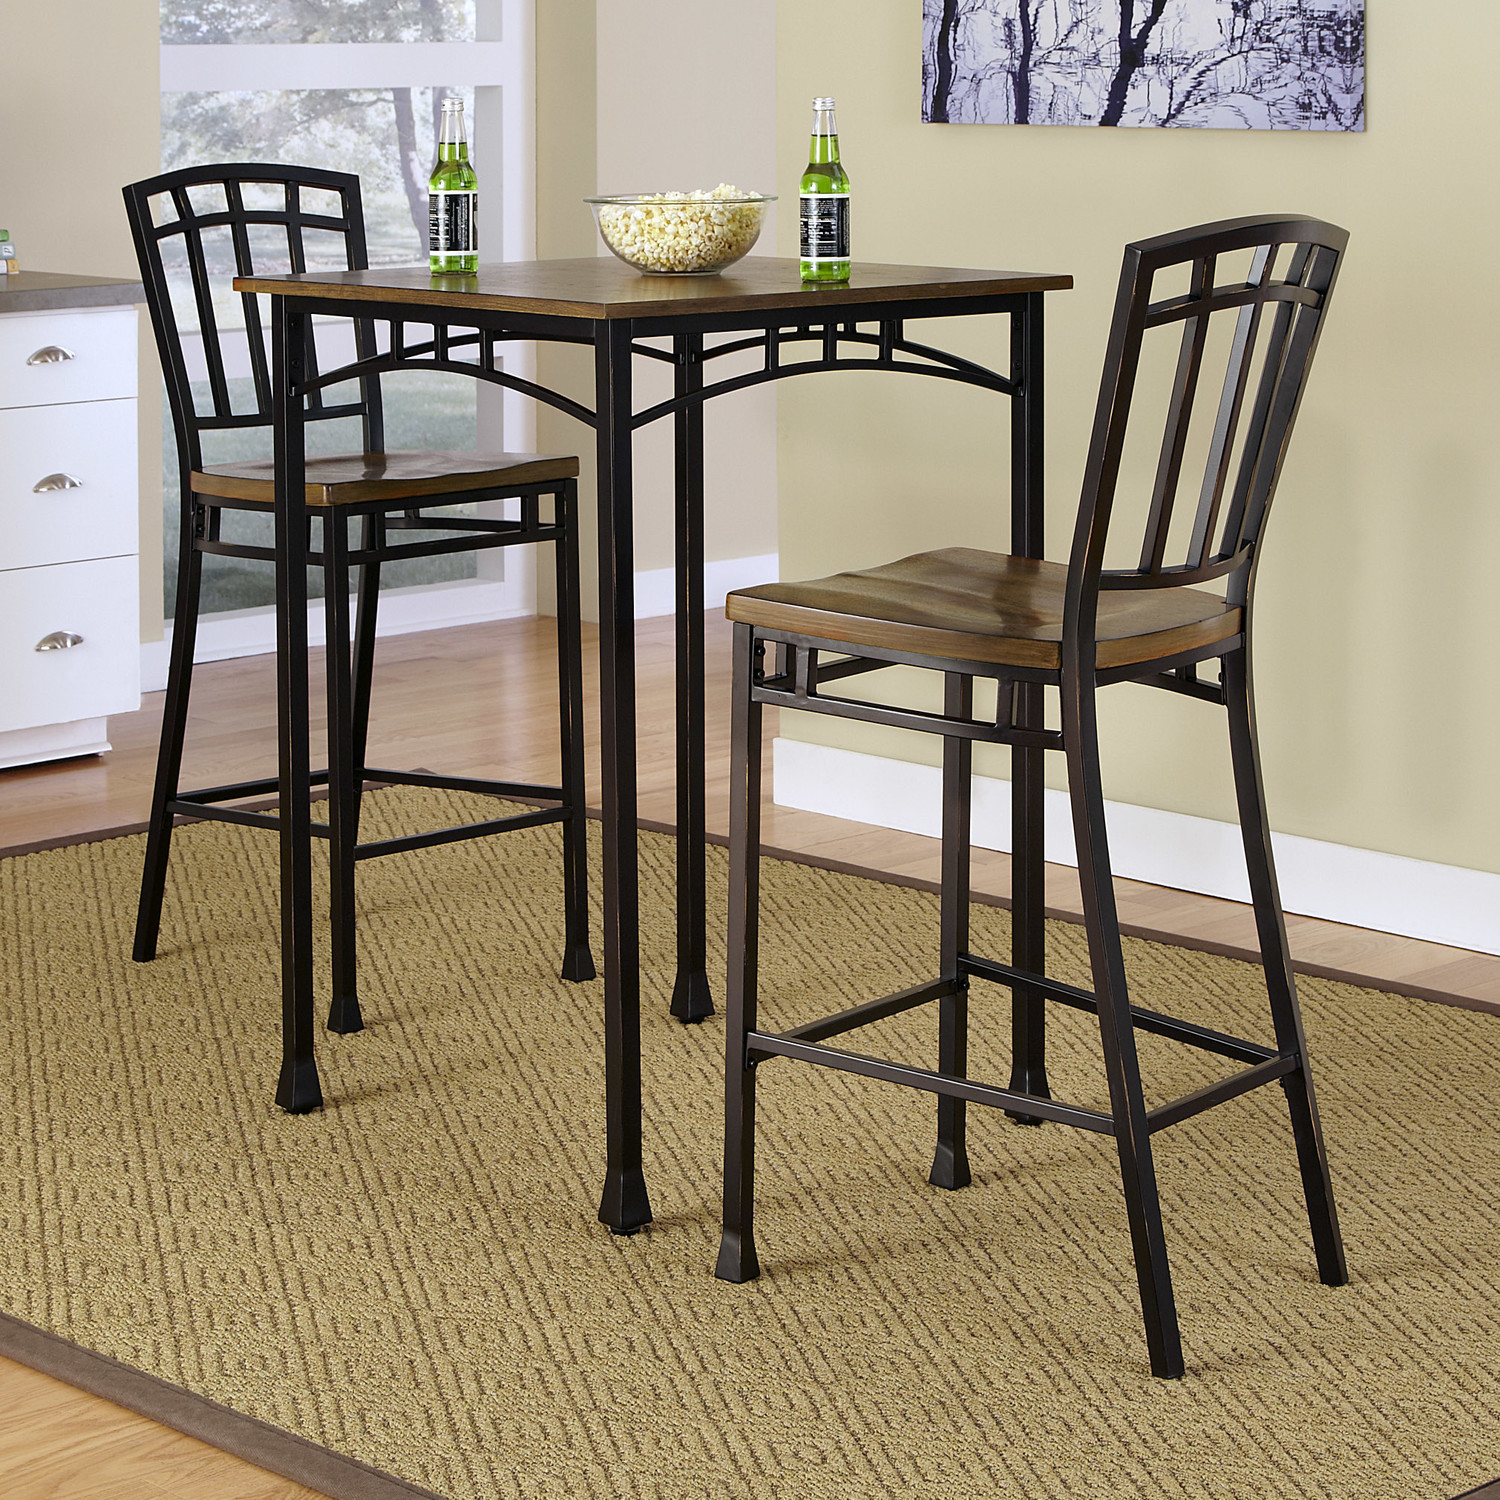 Small Kitchen Bistro Set
 From Classic and Simple to Modern Style of Small Pub Table